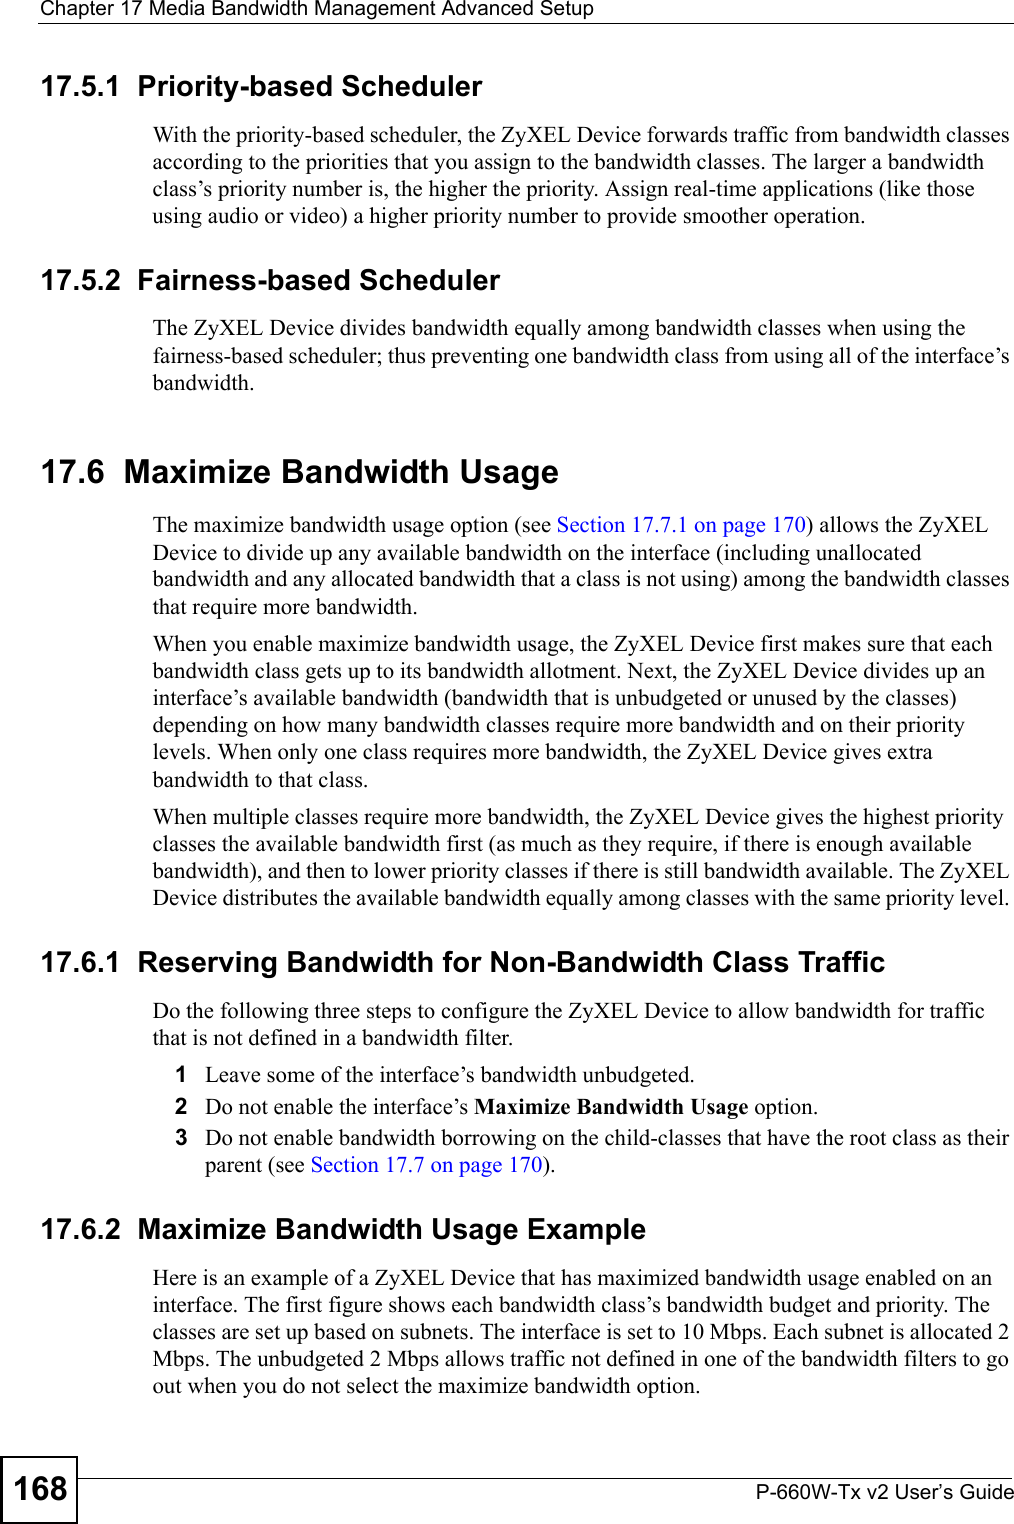 Chapter 17 Media Bandwidth Management Advanced SetupP-660W-Tx v2 User’s Guide16817.5.1  Priority-based SchedulerWith the priority-based scheduler, the ZyXEL Device forwards traffic from bandwidth classes according to the priorities that you assign to the bandwidth classes. The larger a bandwidth class’s priority number is, the higher the priority. Assign real-time applications (like those using audio or video) a higher priority number to provide smoother operation.17.5.2  Fairness-based SchedulerThe ZyXEL Device divides bandwidth equally among bandwidth classes when using the fairness-based scheduler; thus preventing one bandwidth class from using all of the interface’s bandwidth. 17.6  Maximize Bandwidth UsageThe maximize bandwidth usage option (see Section 17.7.1 on page 170) allows the ZyXEL Device to divide up any available bandwidth on the interface (including unallocated bandwidth and any allocated bandwidth that a class is not using) among the bandwidth classes that require more bandwidth. When you enable maximize bandwidth usage, the ZyXEL Device first makes sure that each bandwidth class gets up to its bandwidth allotment. Next, the ZyXEL Device divides up an interface’s available bandwidth (bandwidth that is unbudgeted or unused by the classes) depending on how many bandwidth classes require more bandwidth and on their priority levels. When only one class requires more bandwidth, the ZyXEL Device gives extra bandwidth to that class. When multiple classes require more bandwidth, the ZyXEL Device gives the highest priority classes the available bandwidth first (as much as they require, if there is enough available bandwidth), and then to lower priority classes if there is still bandwidth available. The ZyXEL Device distributes the available bandwidth equally among classes with the same priority level. 17.6.1  Reserving Bandwidth for Non-Bandwidth Class TrafficDo the following three steps to configure the ZyXEL Device to allow bandwidth for traffic that is not defined in a bandwidth filter.1Leave some of the interface’s bandwidth unbudgeted.2Do not enable the interface’s Maximize Bandwidth Usage option.3Do not enable bandwidth borrowing on the child-classes that have the root class as their parent (see Section 17.7 on page 170).17.6.2  Maximize Bandwidth Usage ExampleHere is an example of a ZyXEL Device that has maximized bandwidth usage enabled on an interface. The first figure shows each bandwidth class’s bandwidth budget and priority. The classes are set up based on subnets. The interface is set to 10 Mbps. Each subnet is allocated 2 Mbps. The unbudgeted 2 Mbps allows traffic not defined in one of the bandwidth filters to go out when you do not select the maximize bandwidth option.